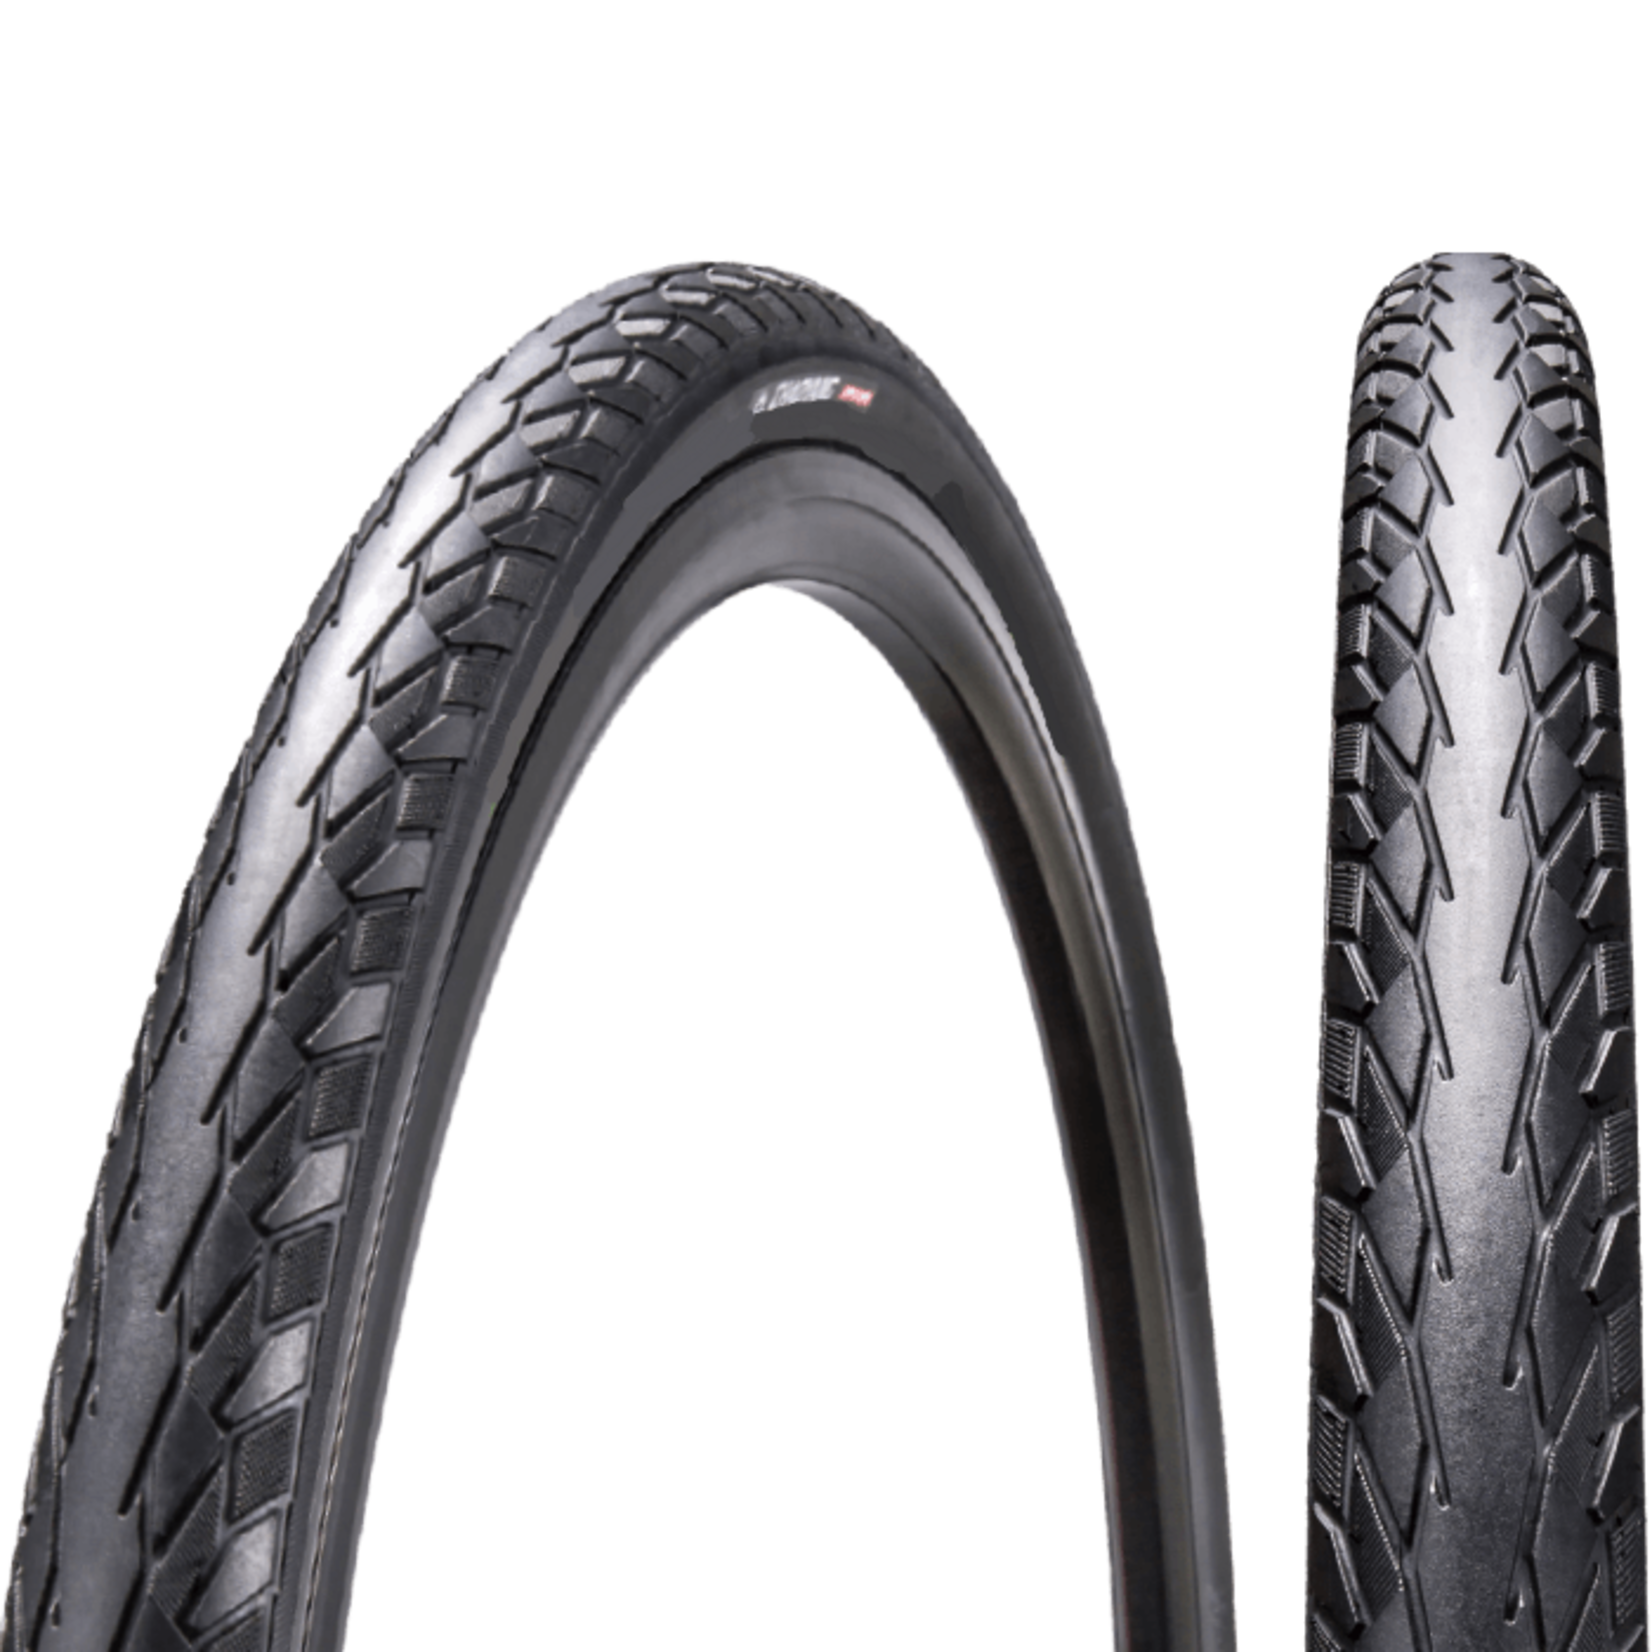 BABAC HIPPO H480 1.5MM 700 X 38 TIRE